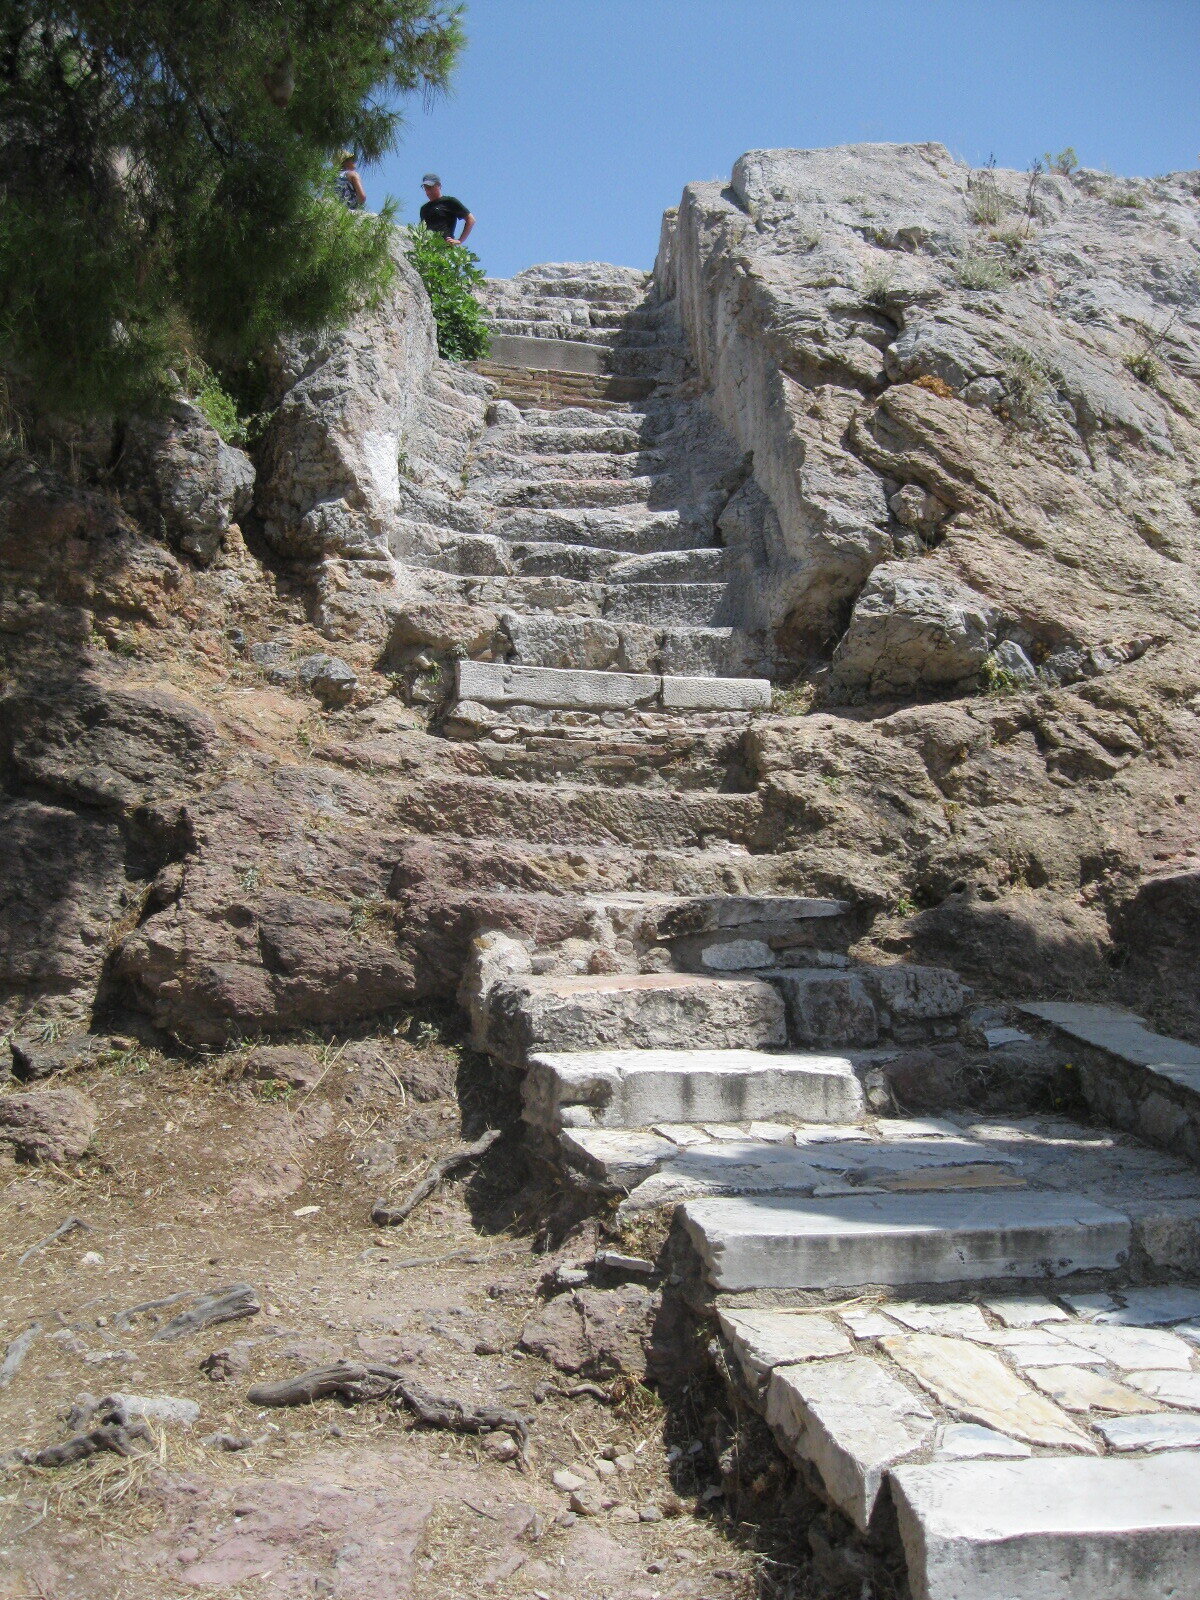  This is the walkway leading up to Mars Hill, across from the Acropolis 